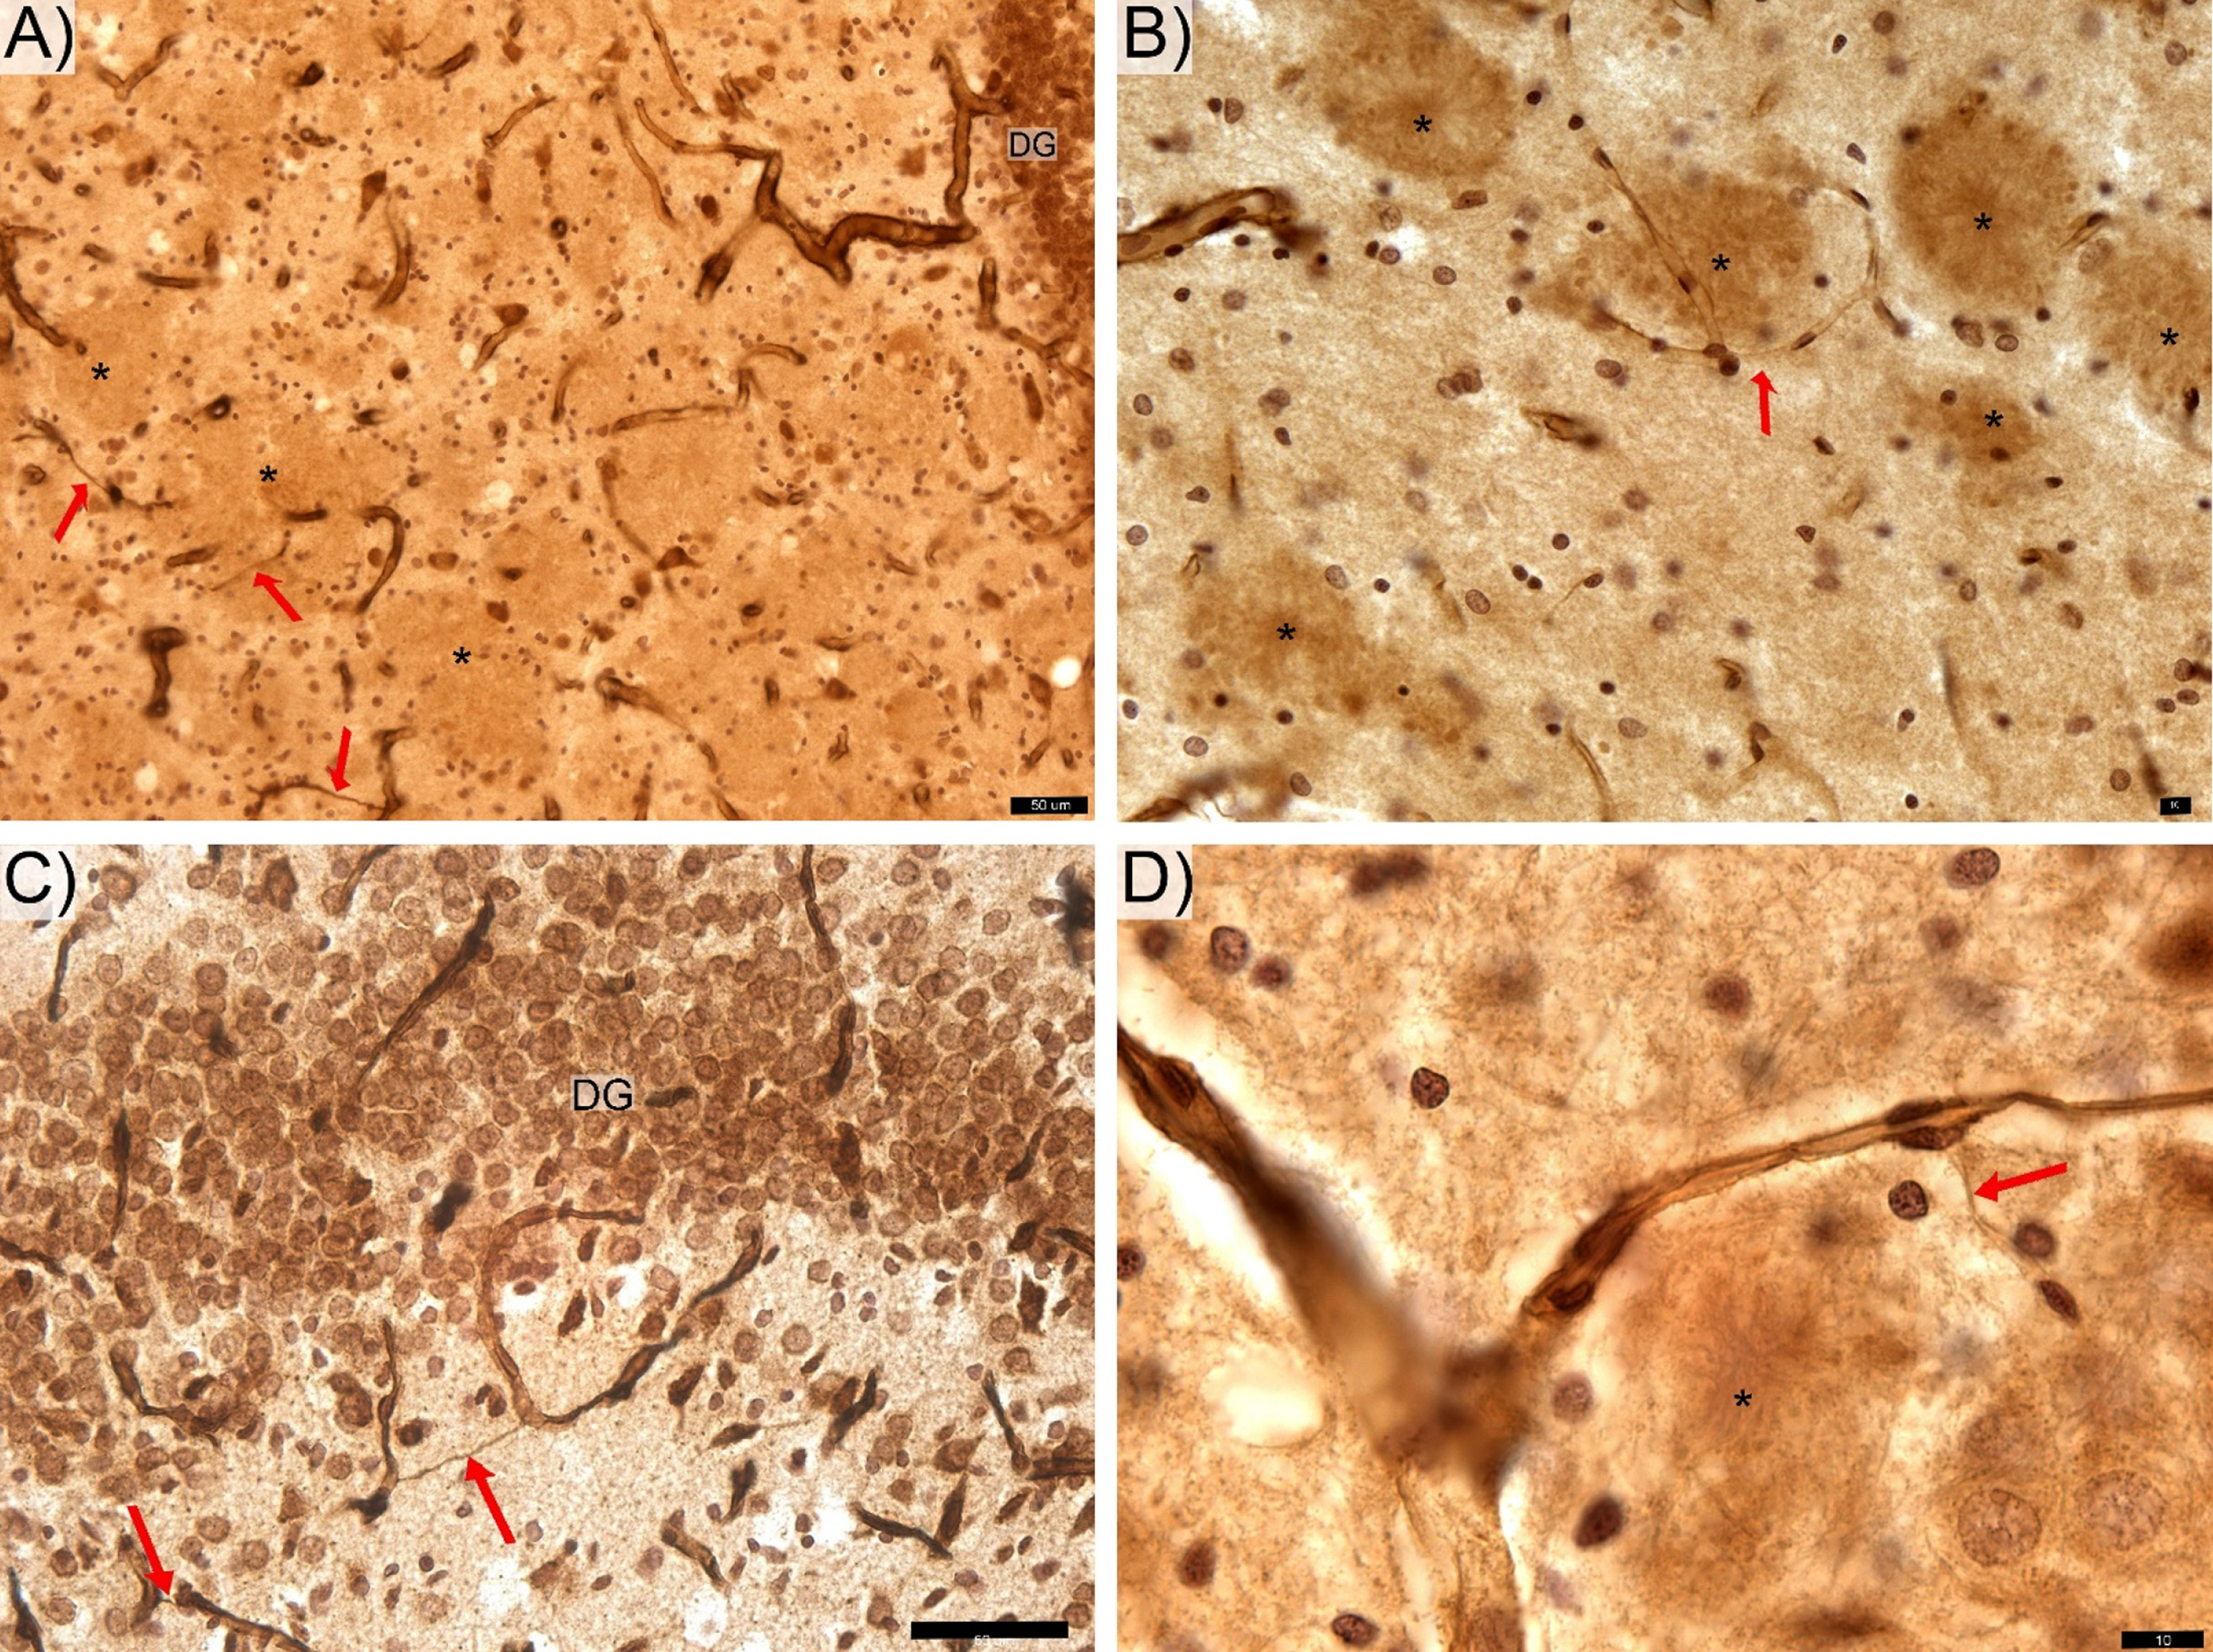 Features of thin hair-like capillaries (red arrows) commonly find in TgF rats. DG-, CA 2/3-, and CA1-labeled respective zone of the pyramidal cells layer. The anti-laminin antibody labeled hippocampal sections from the transgenic rats contain areas of with clear contours (*) appear as likely locations of Aβ deposition. Space bars: A,C – 50 μm; B, D – 10 μm.